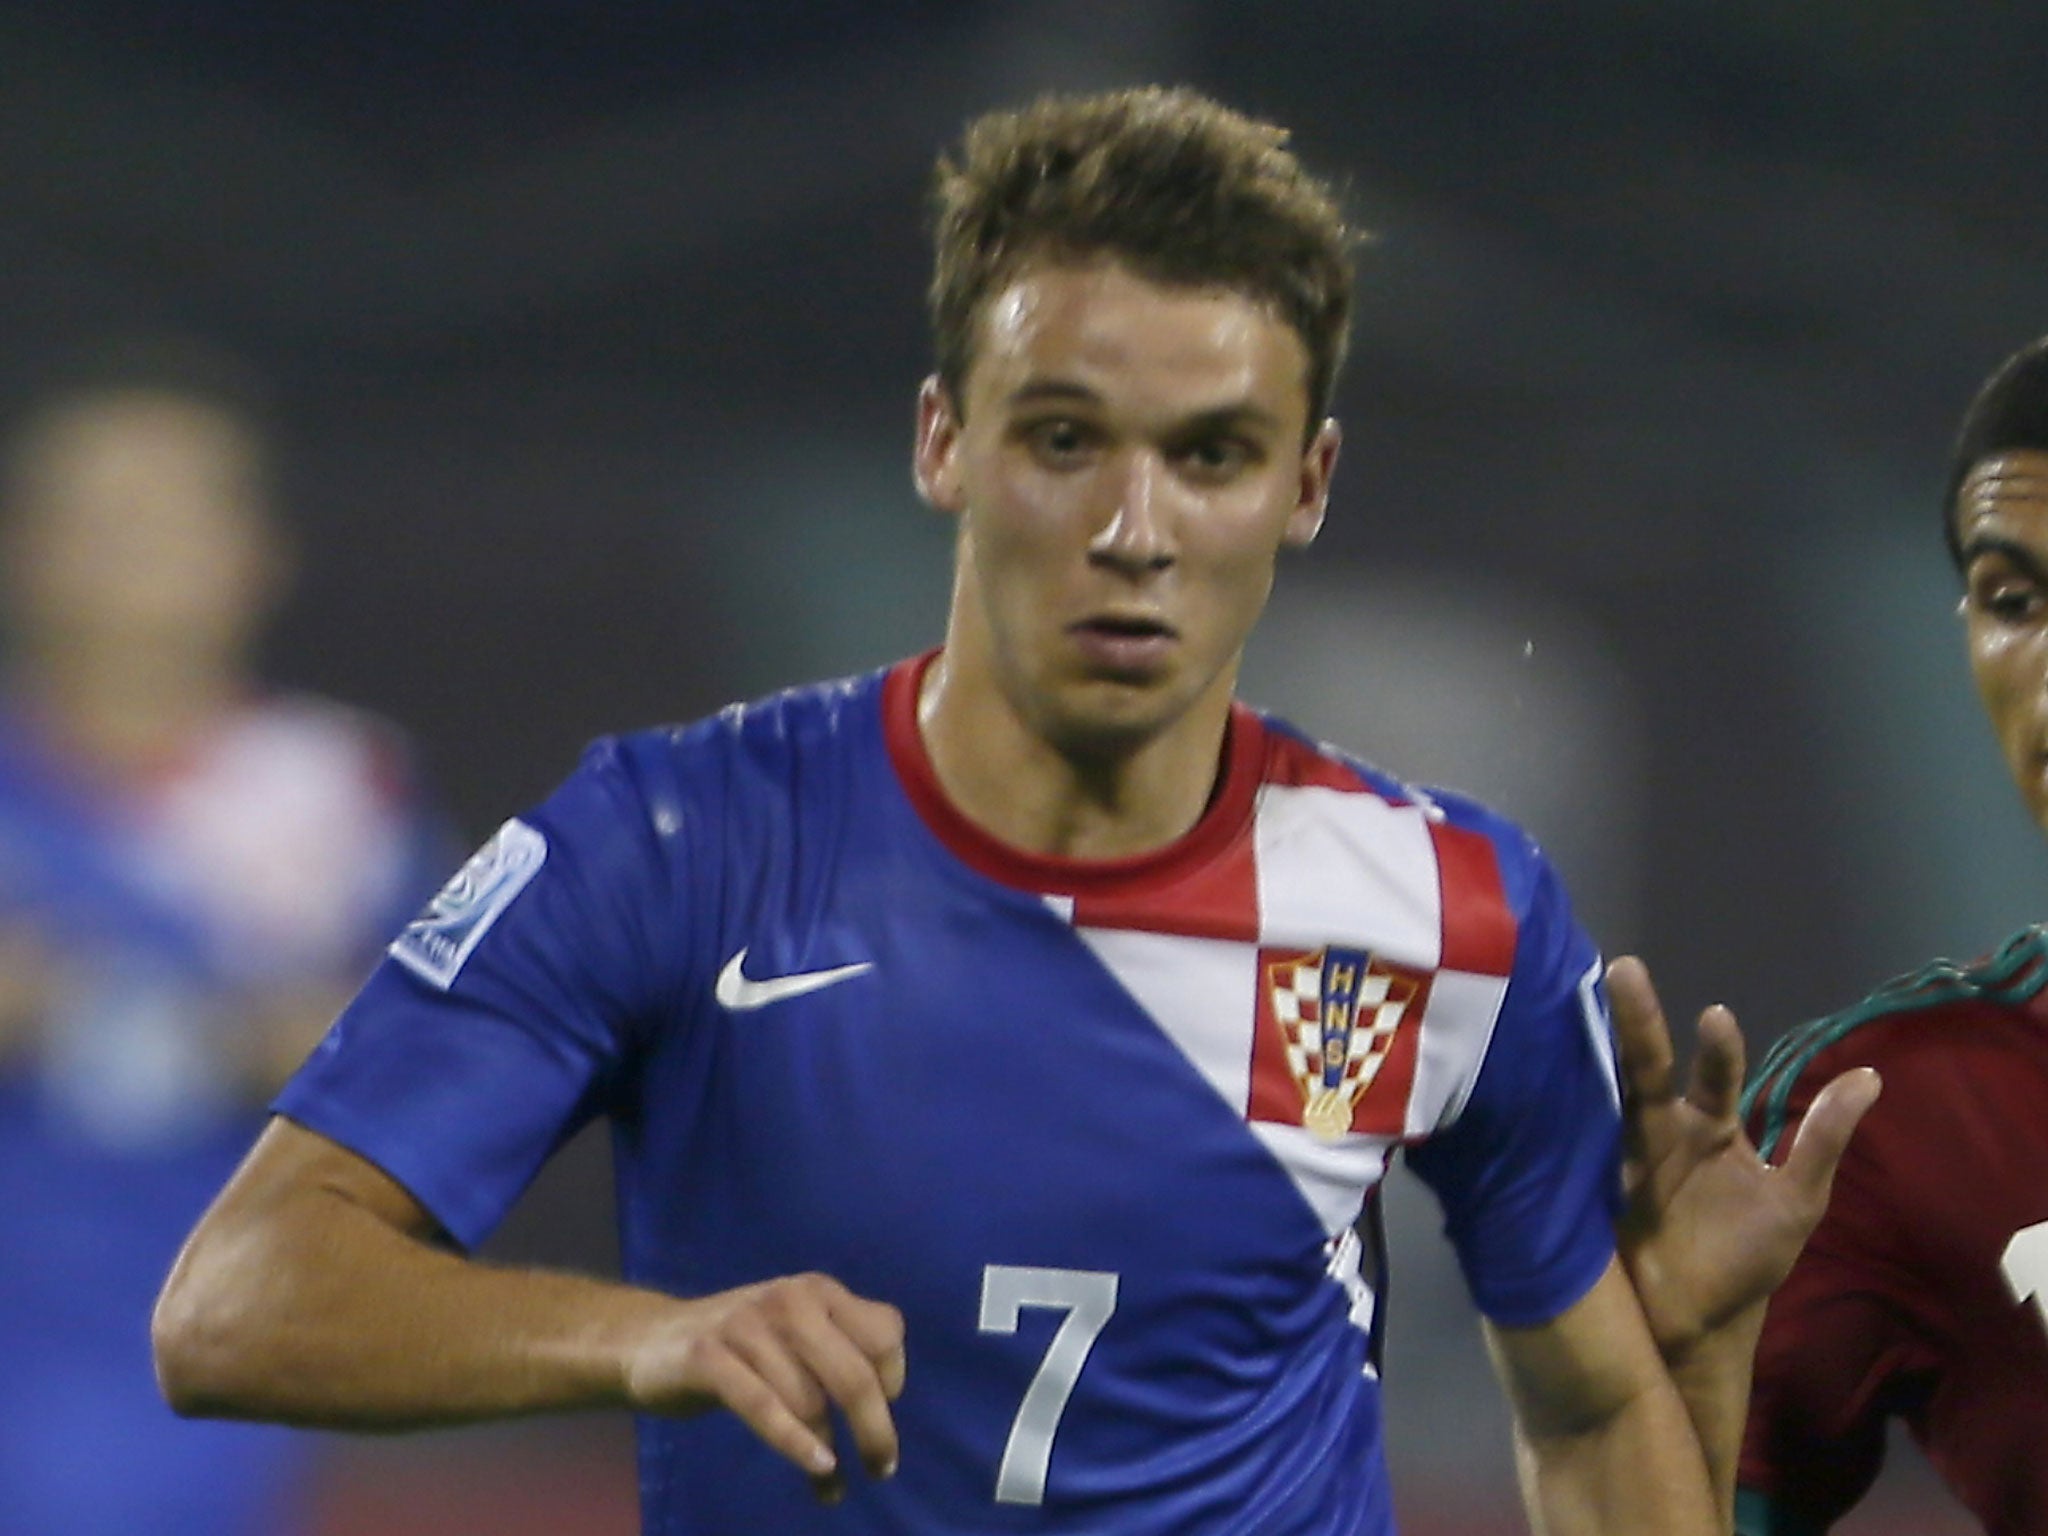 Manchester United target Robert Muric could be available for as little as £300,000 after a contract dispute with his current club Dinamo Zagreb